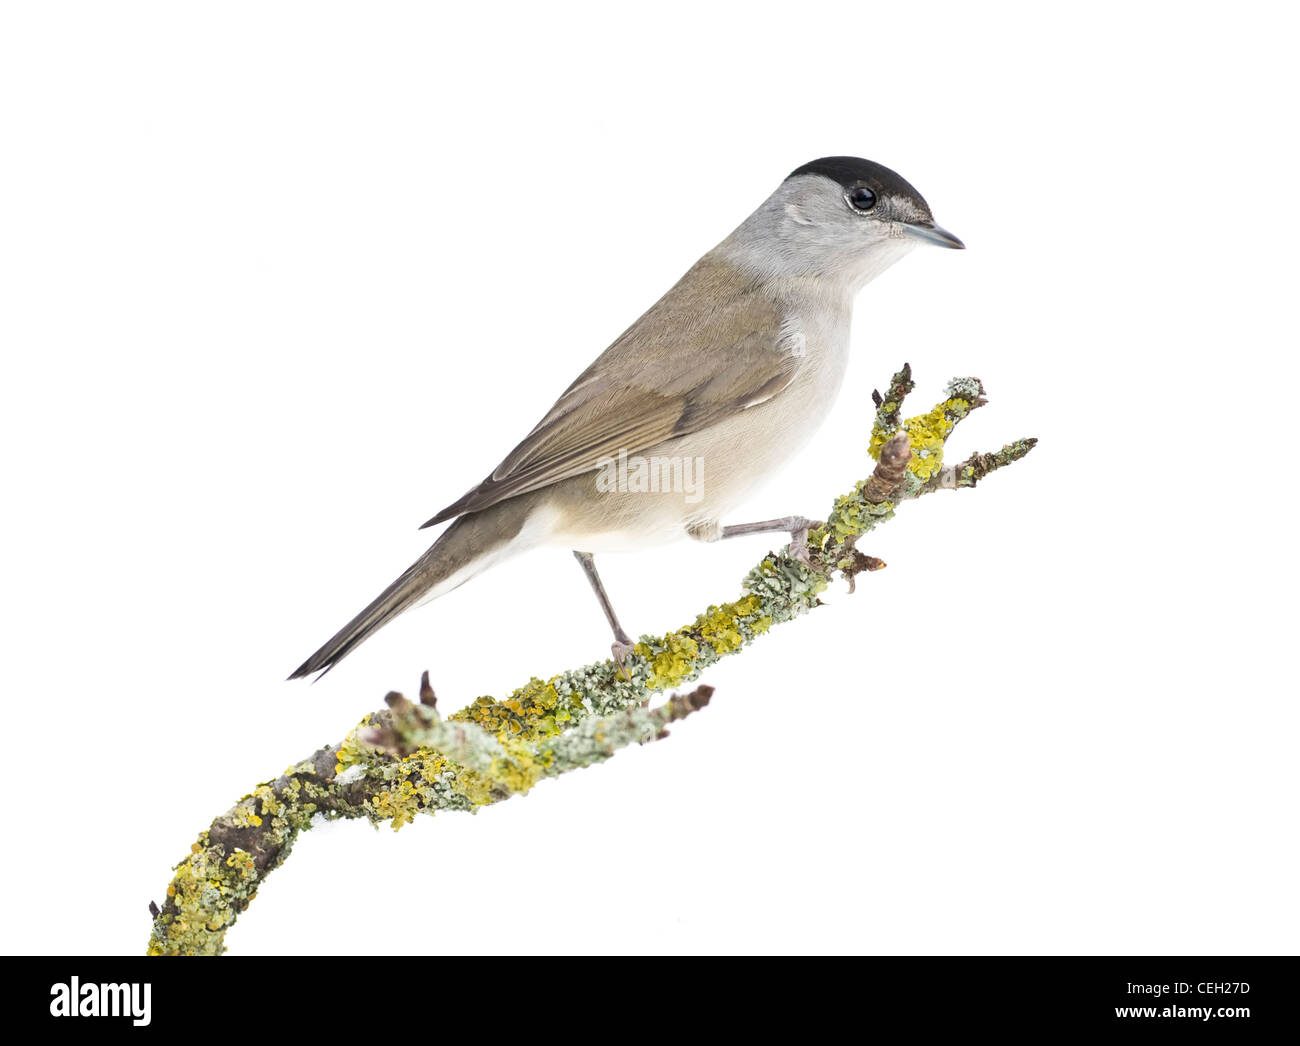 Male Blackcap perched on moss covered branch against a white background Stock Photo